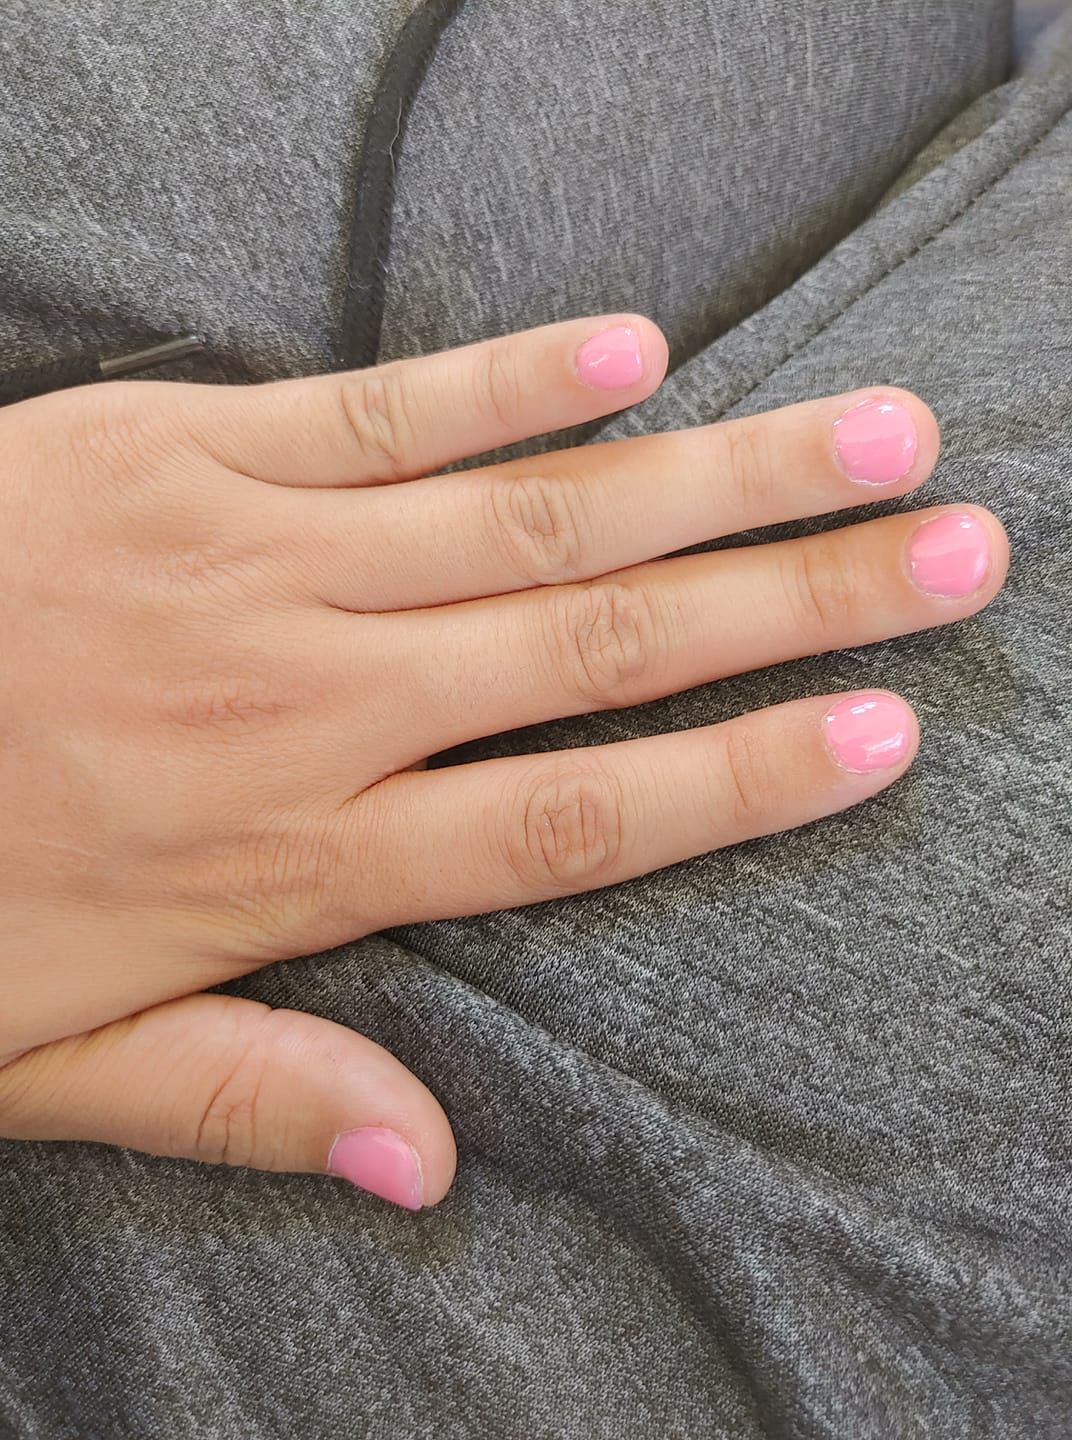 FT Beauty - 'My nails are too short for gels' Example... | Facebook